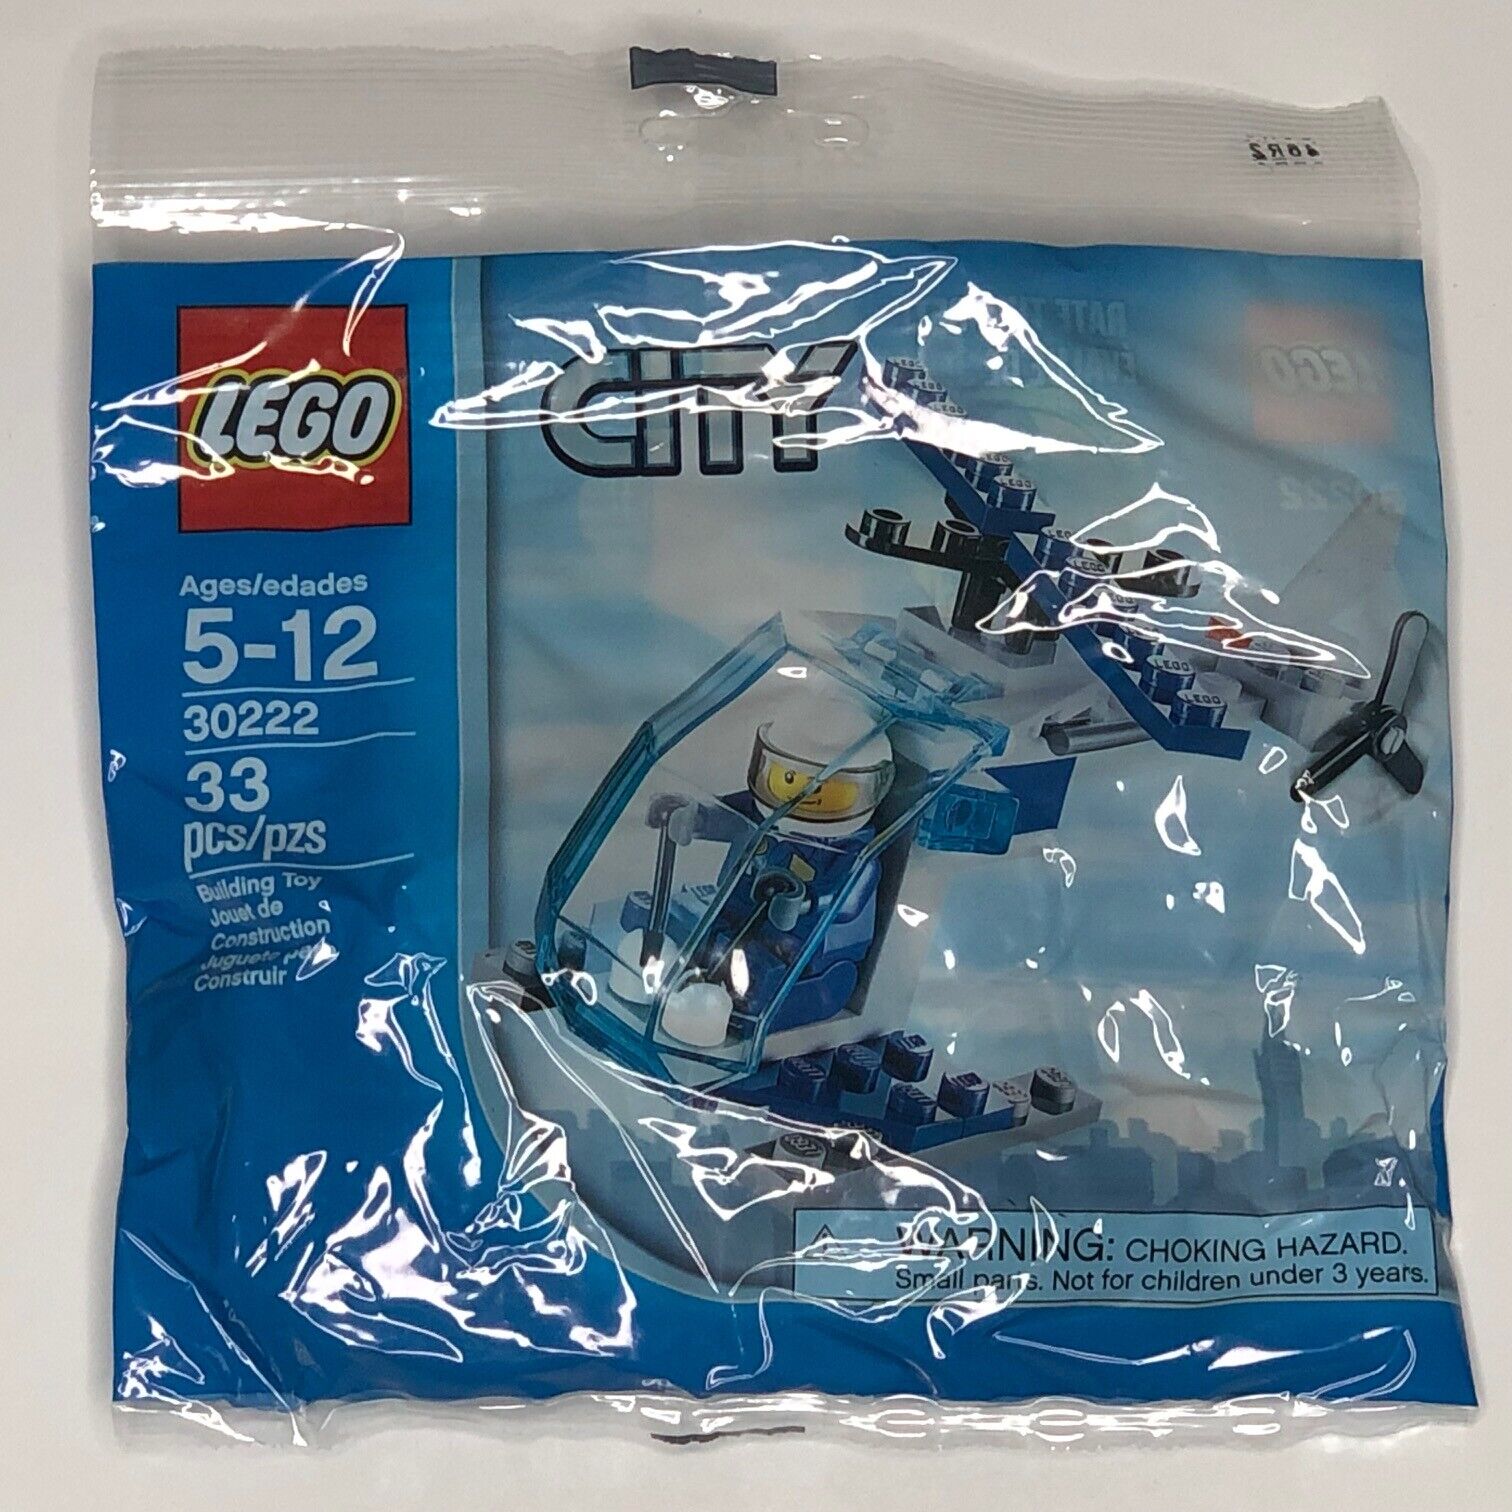 LEGO City Police Helicopter 30222 Patrol Vehicle Minifigure Polybag Retired